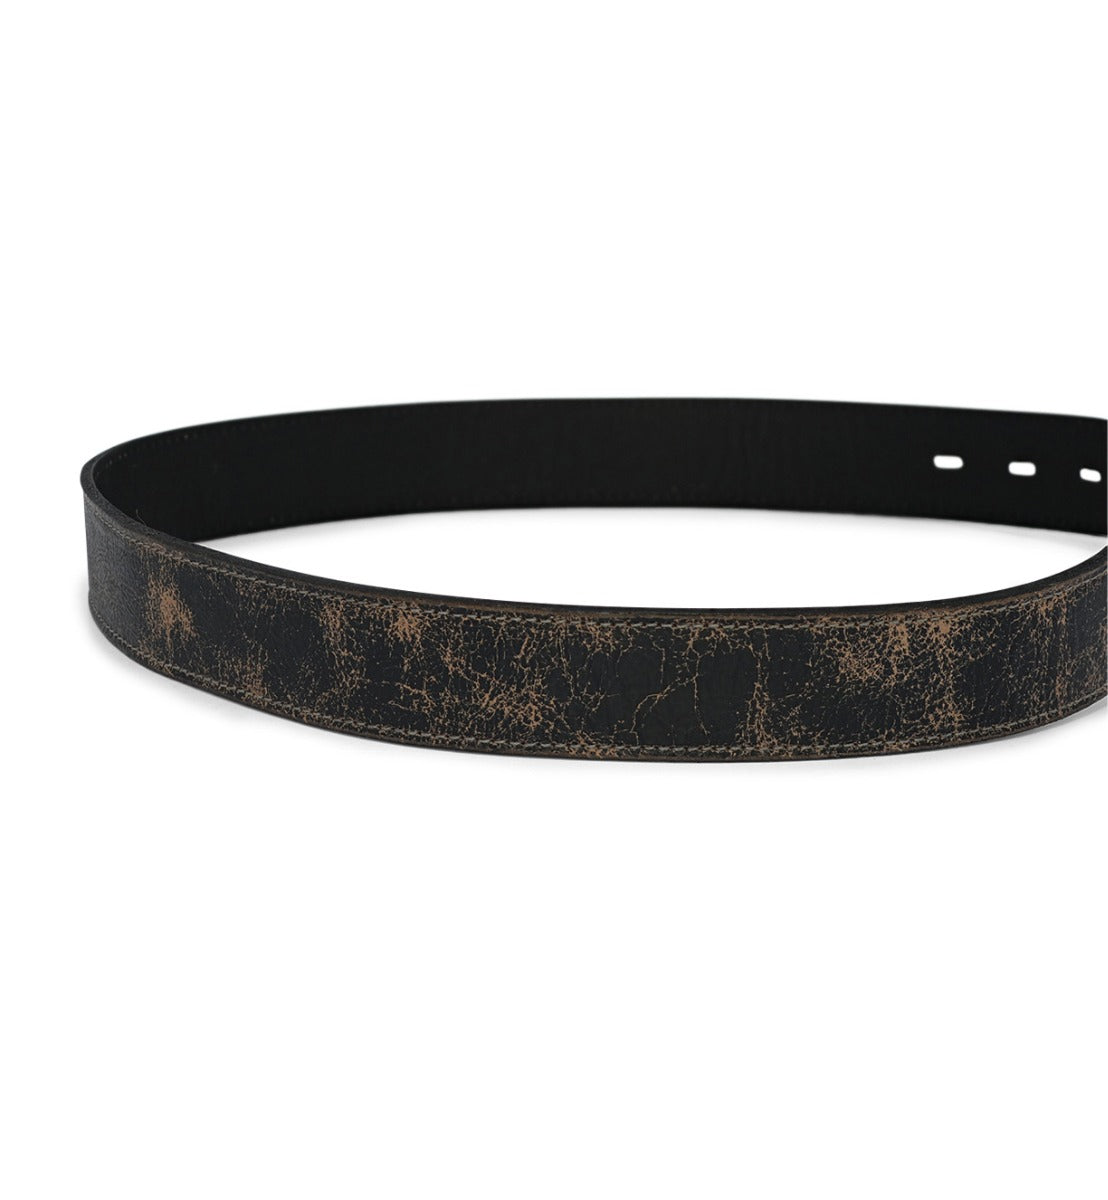 Meander by Bed Stu black distressed leather belt with visible wear and texture on a white background.